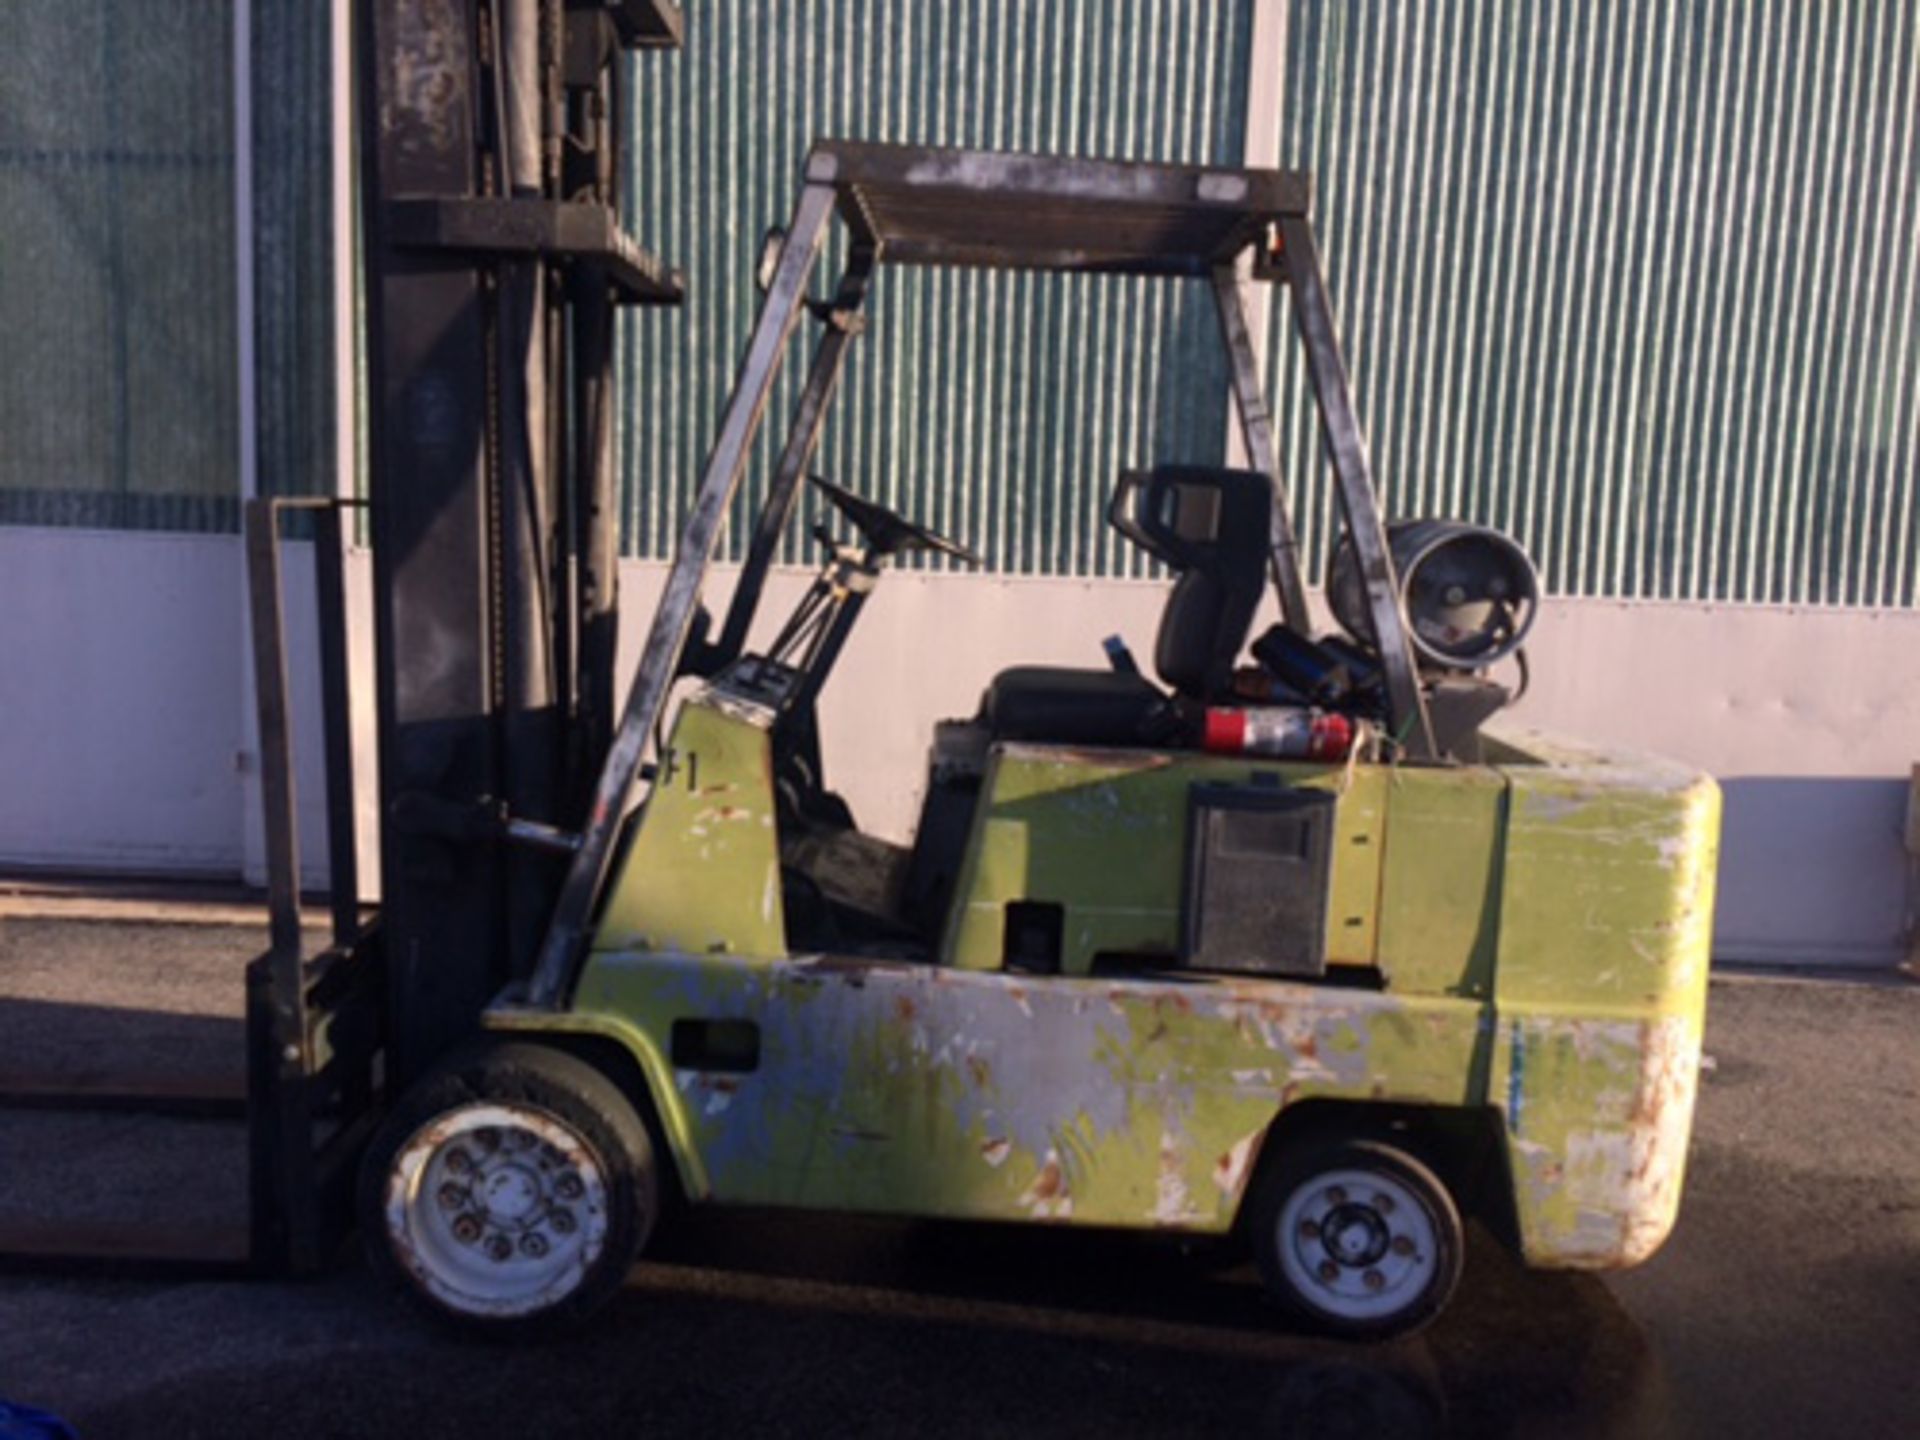 10,000 LB Clark C500 Forklift Hard Tire Propane Triple Stage Mast Side Shift - Located In: